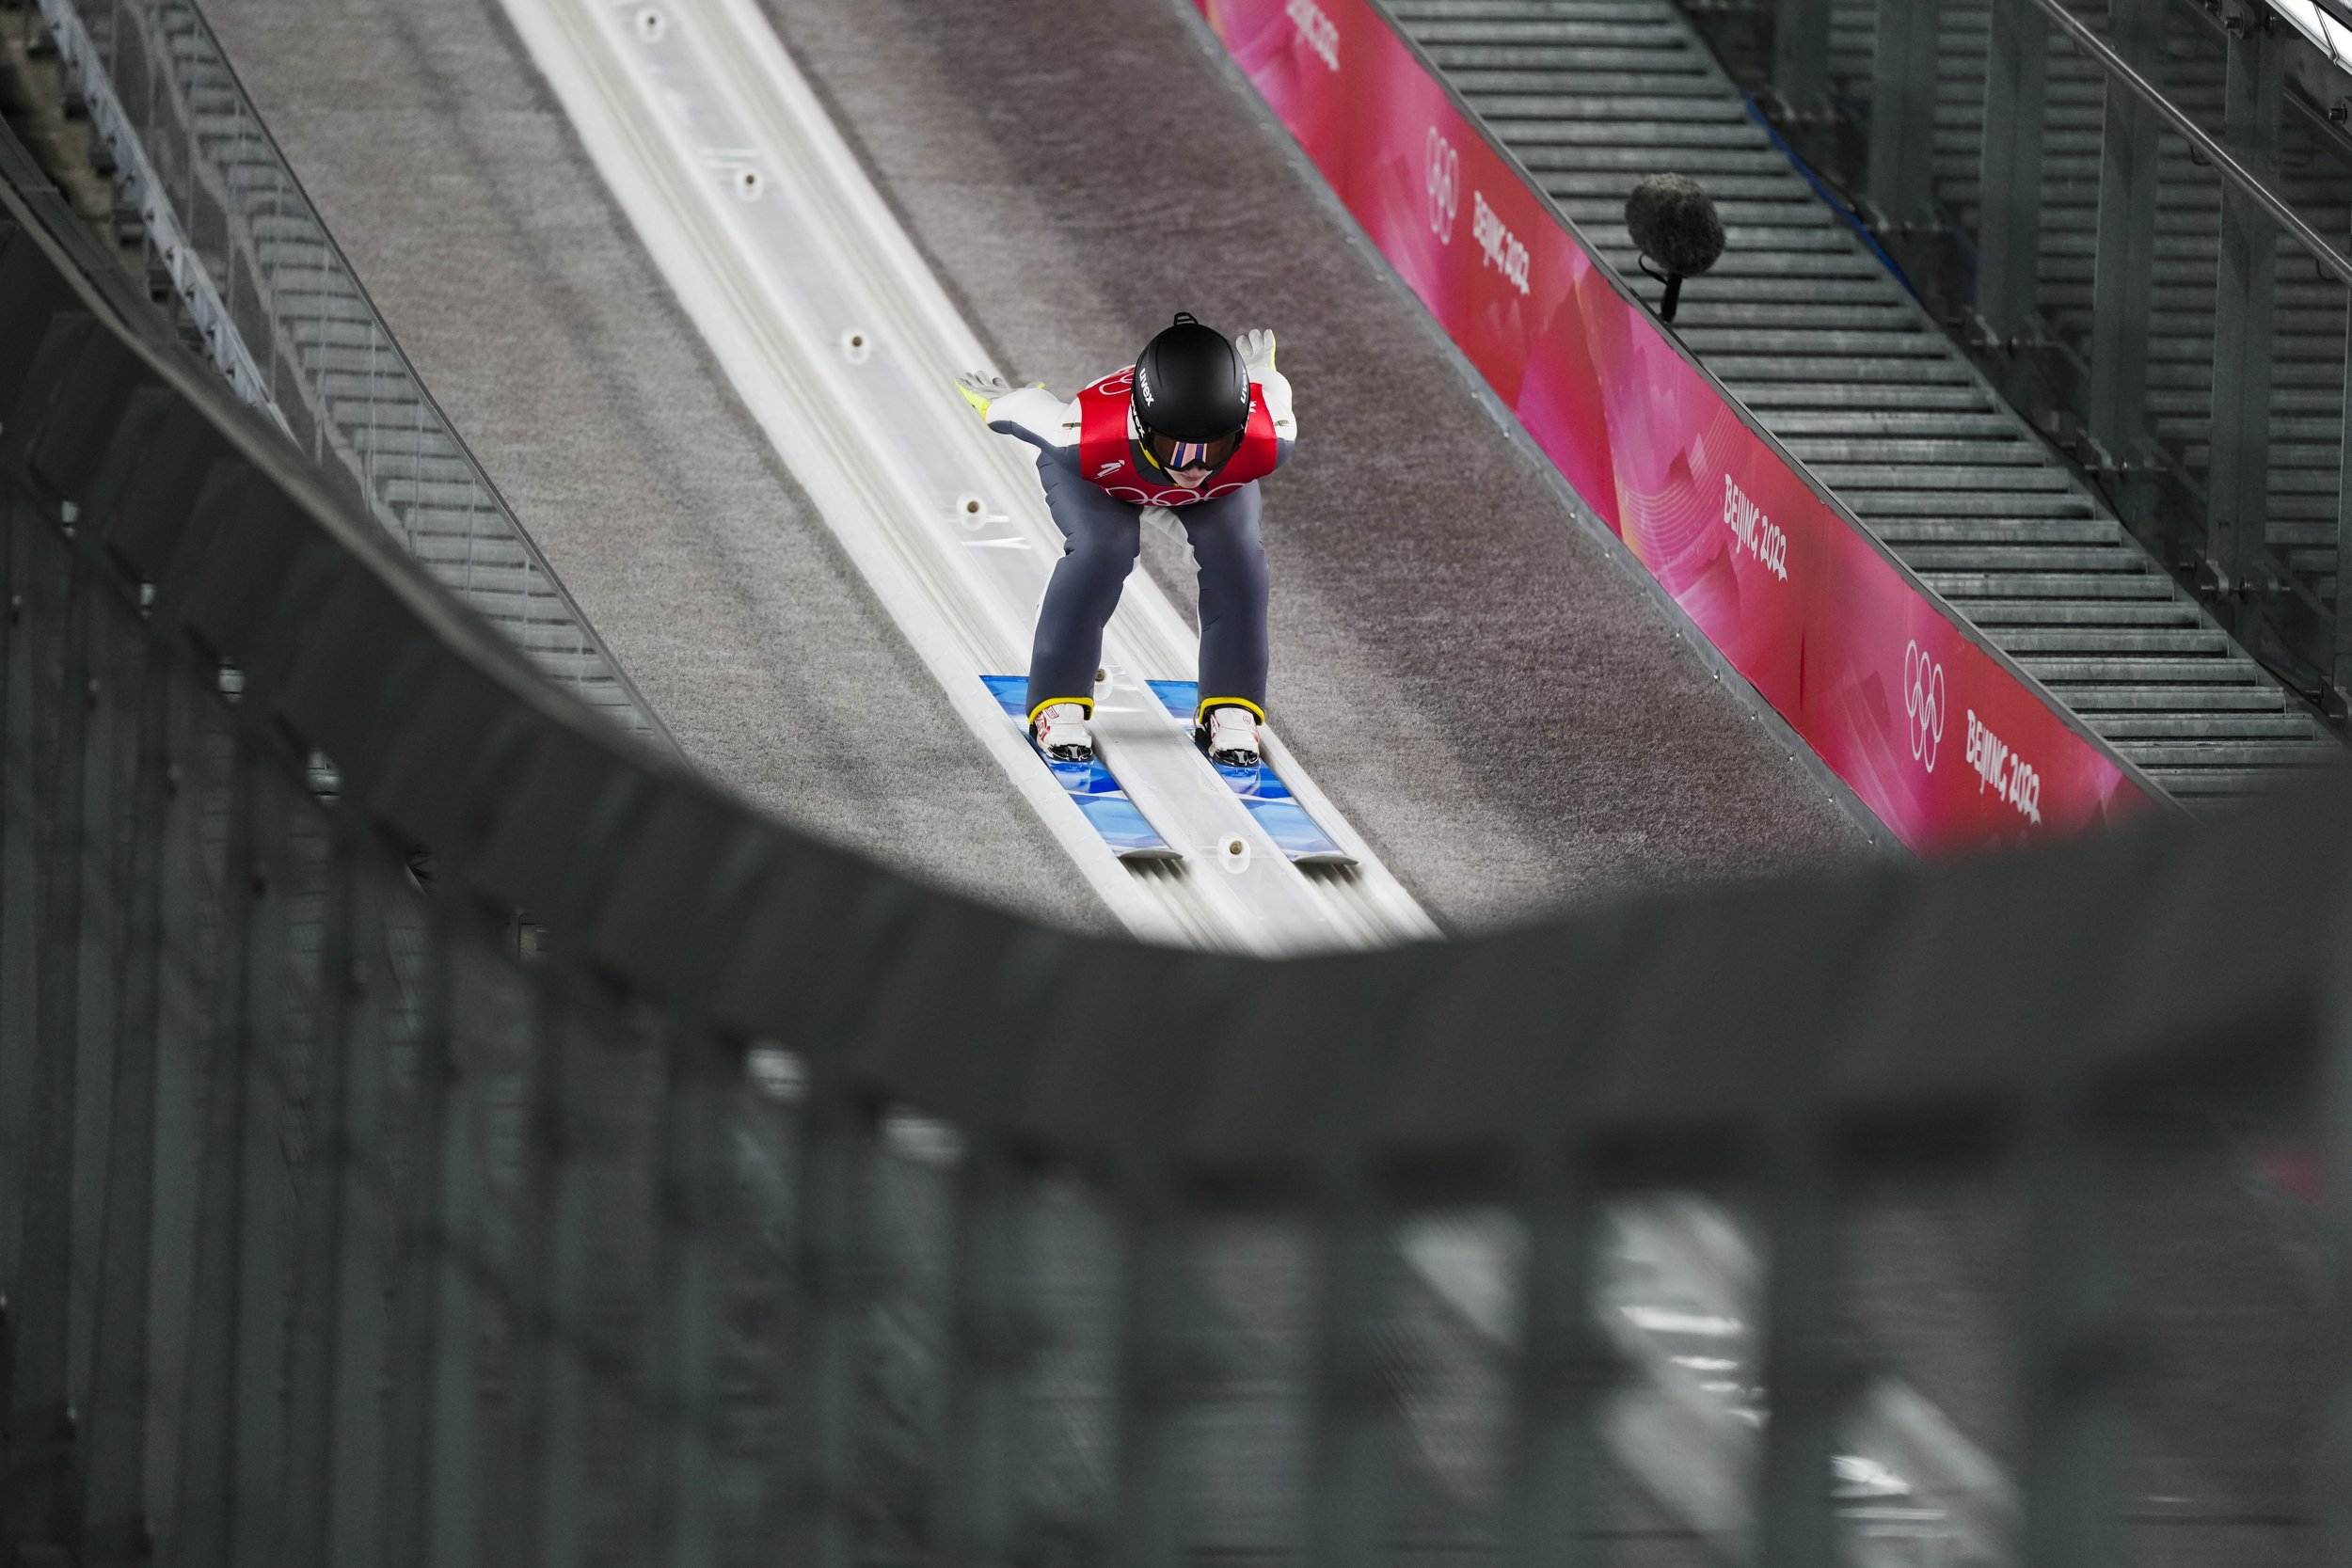  Irma Makhinia, of the Russian Olympic Committee, speeds down the hill during the mixed team trial round at the 2022 Winter Olympics, Monday, Feb. 7, 2022, in Zhangjiakou, China. (AP Photo/Andrew Medichini) 